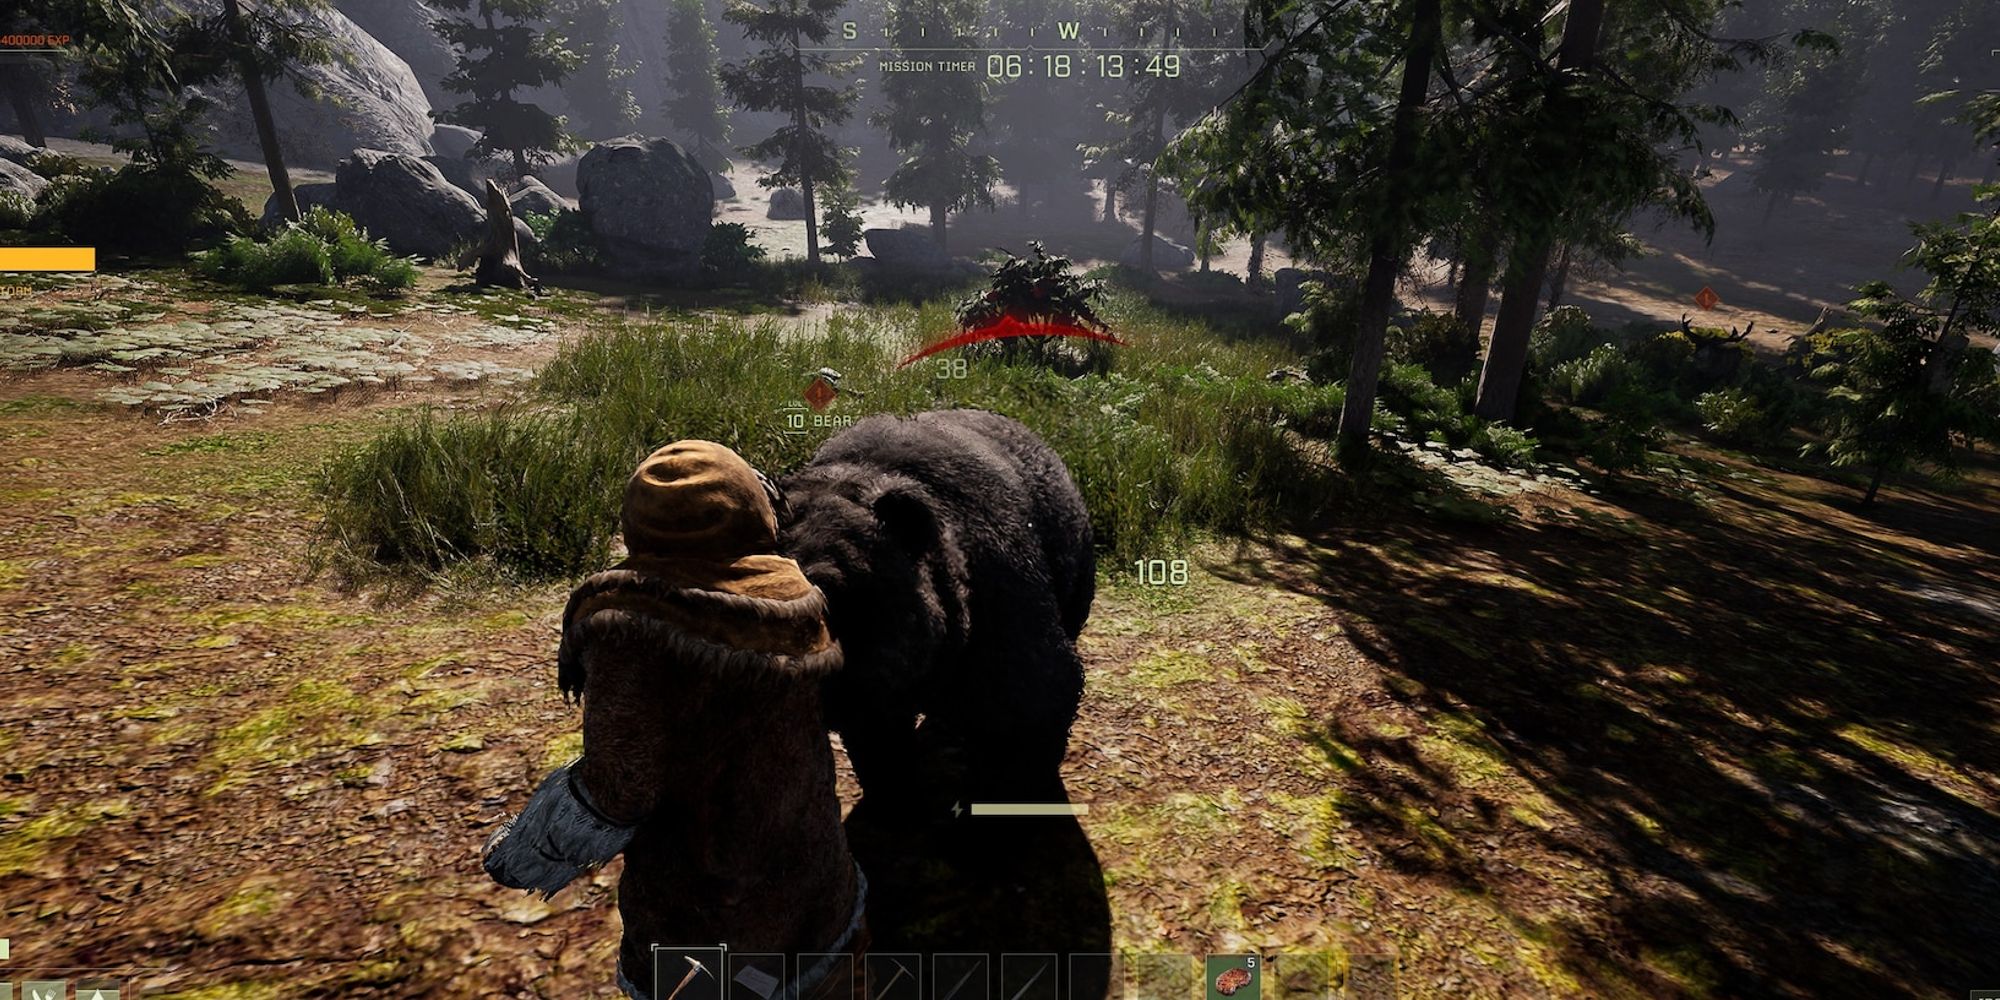 player directly in front of a bear attempting to kill it